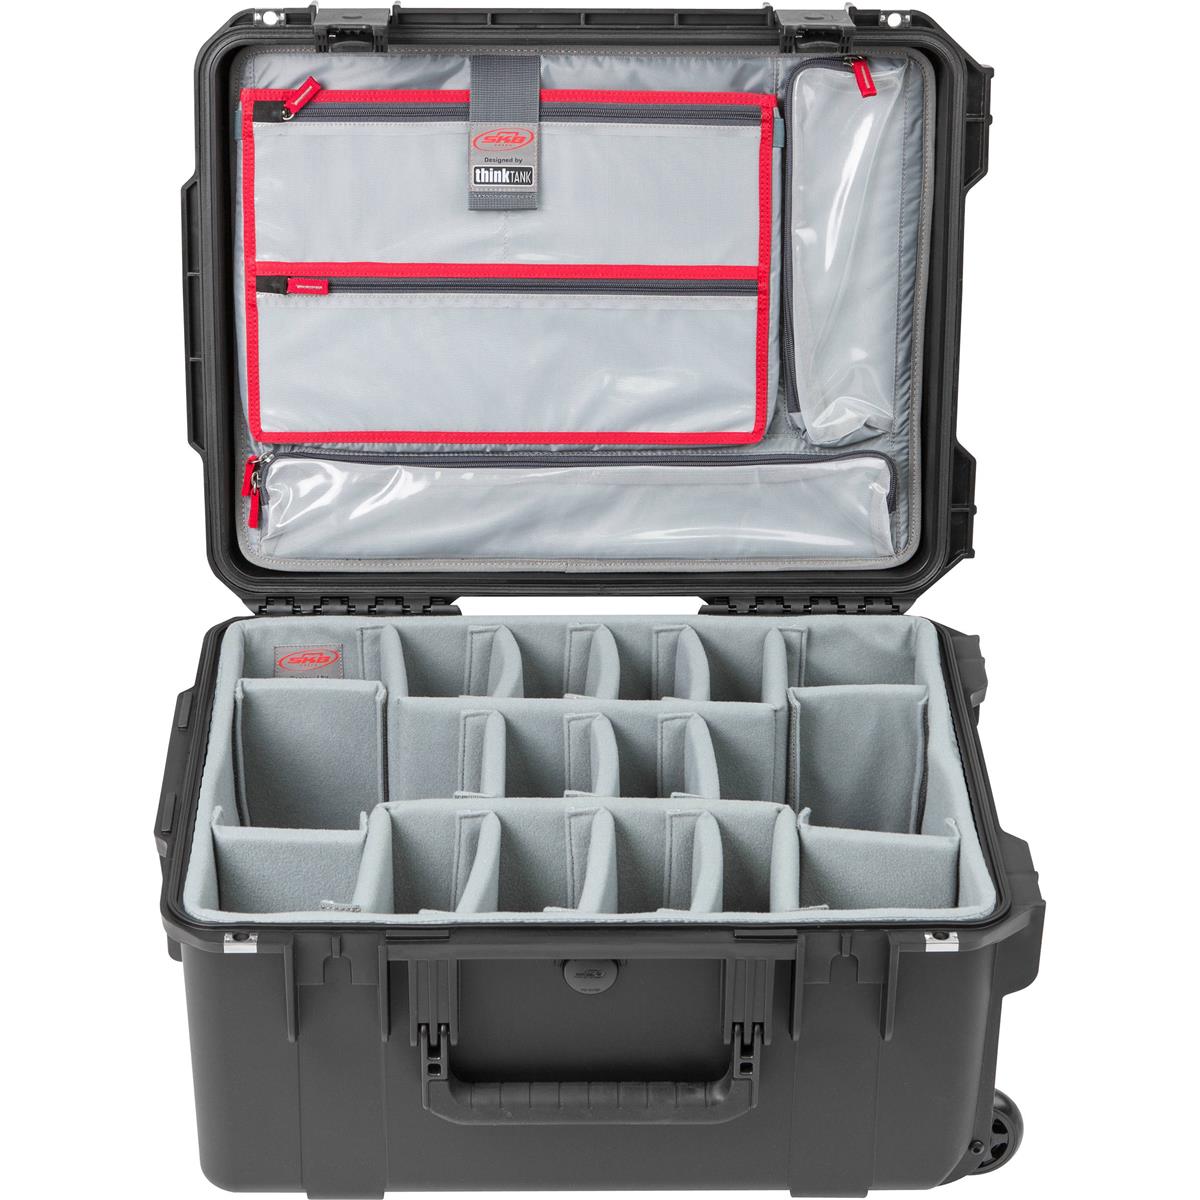 SKB iSeries 2015-10 Case with Think Tank Designed Photo Dividers & Lid Organizer (Black)